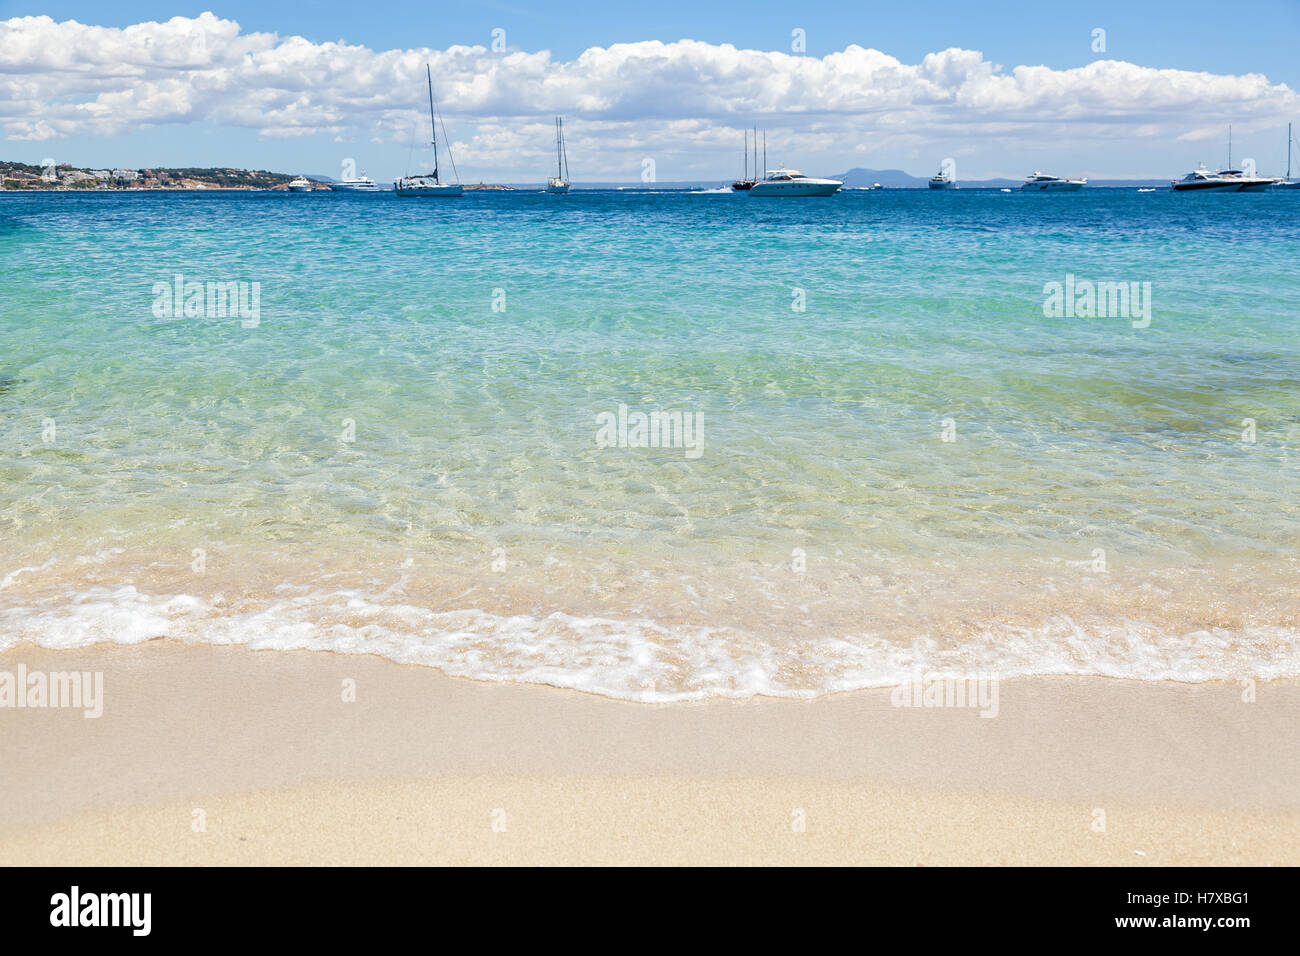 Palmanova Beach. Foamy waves lapping on the shore. In the distance are many sailers and yachts under the massive clouds. Spain Stock Photo